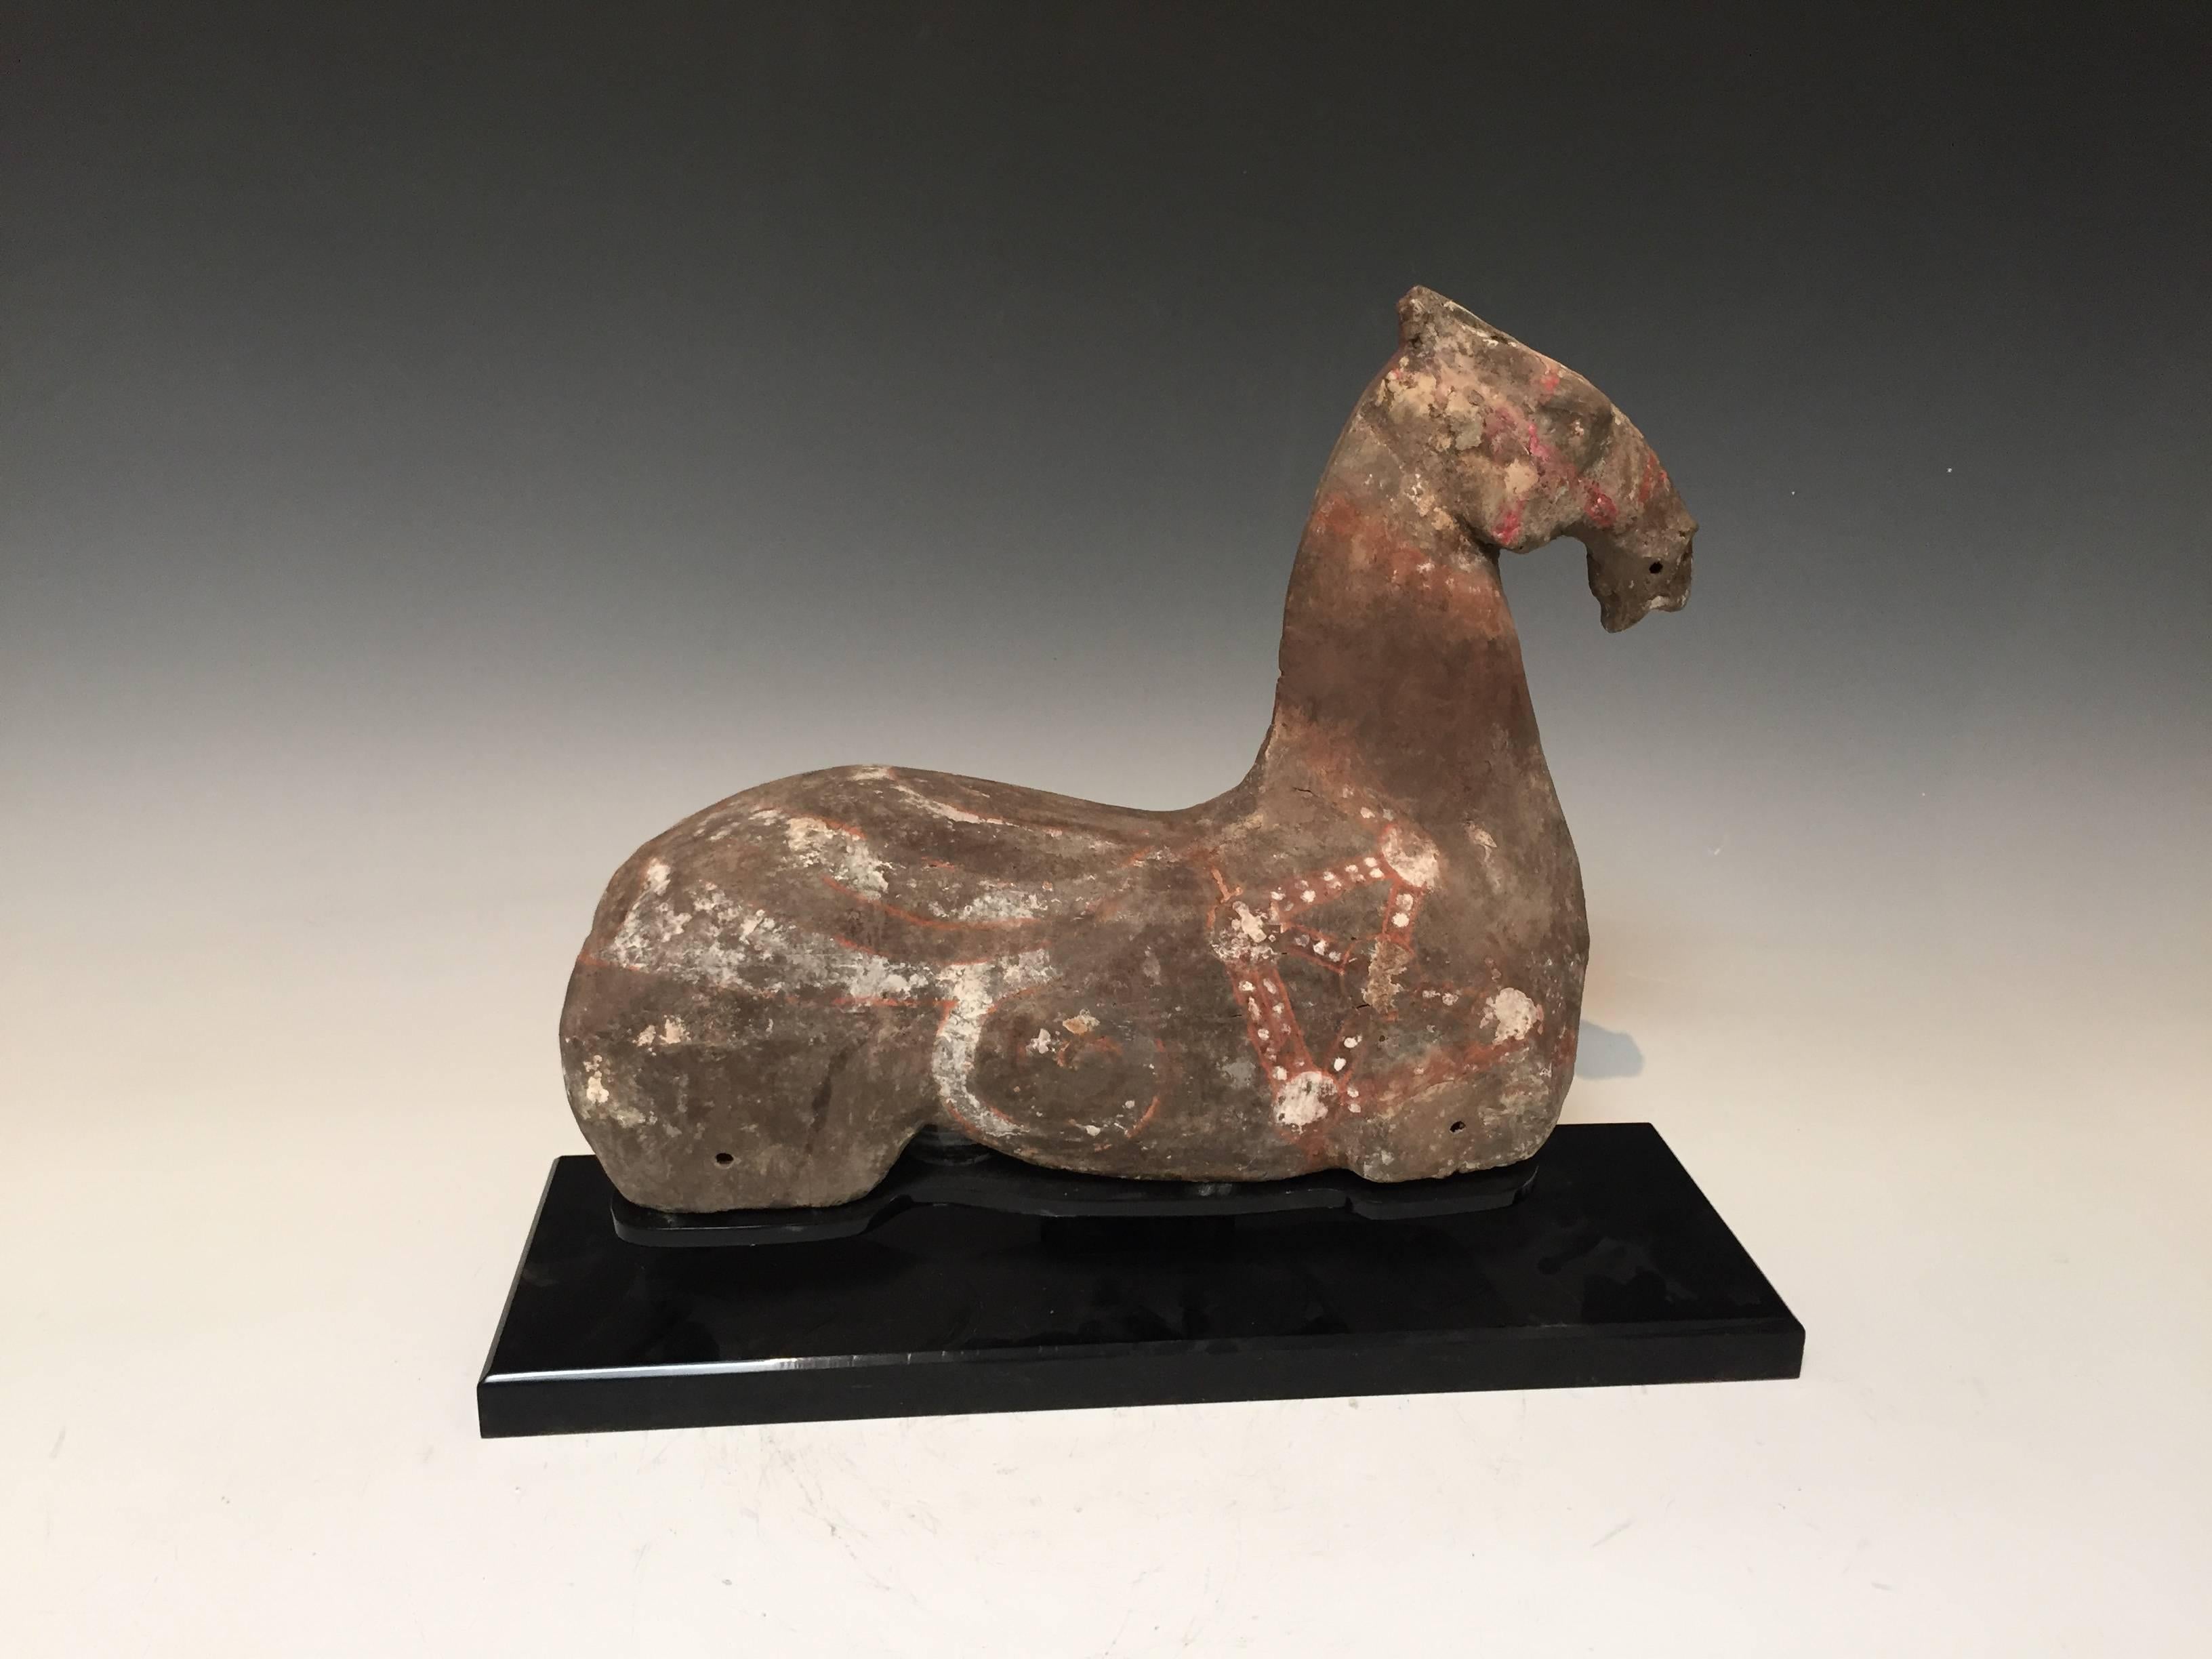 Han dynasty reclining horse with pigments.
There are inserts at the base of the horse where there may have held wooden legs.
Measure: 9.5